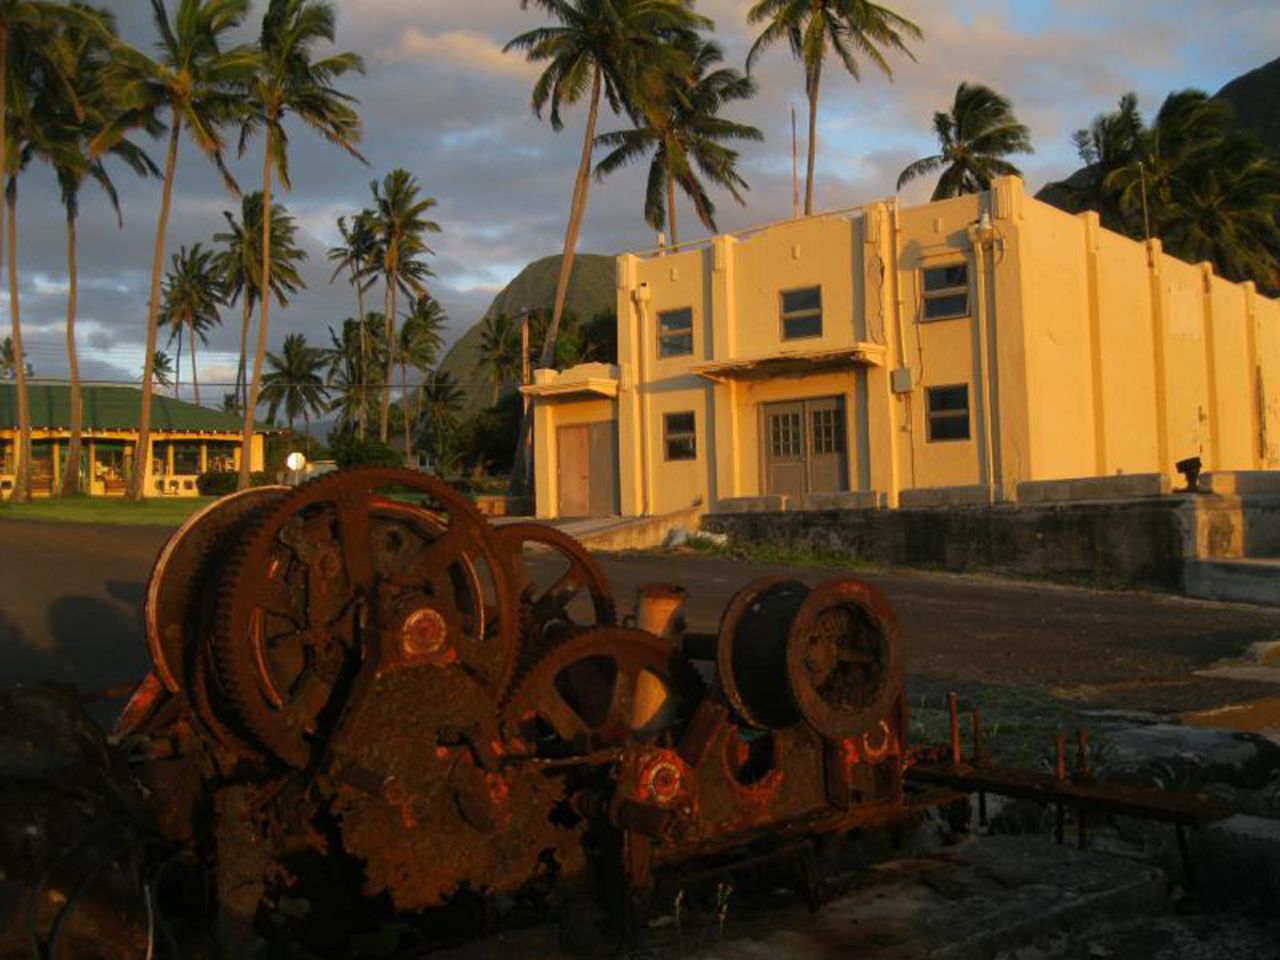 The settlement's main warehouse was built around 1931 and many of the supplies sold at the Kalaupapa store (left) are still kept there.